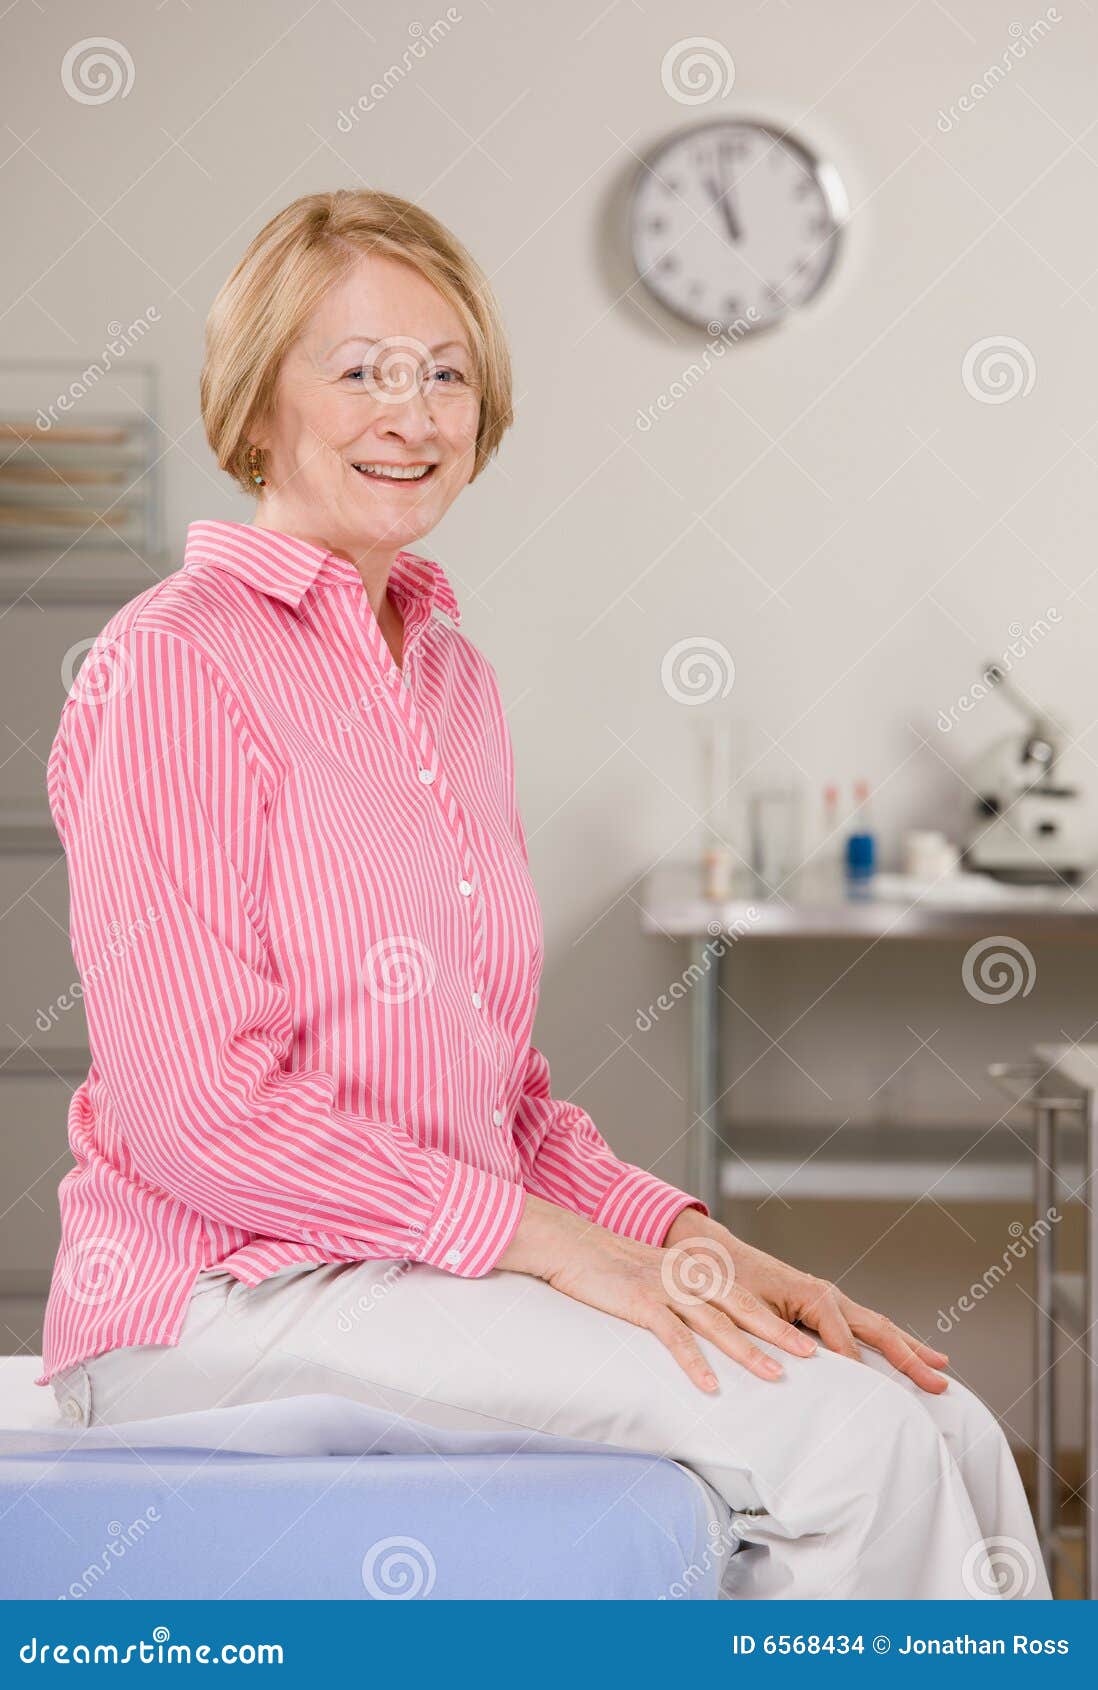 woman sitting on exam table during checkup